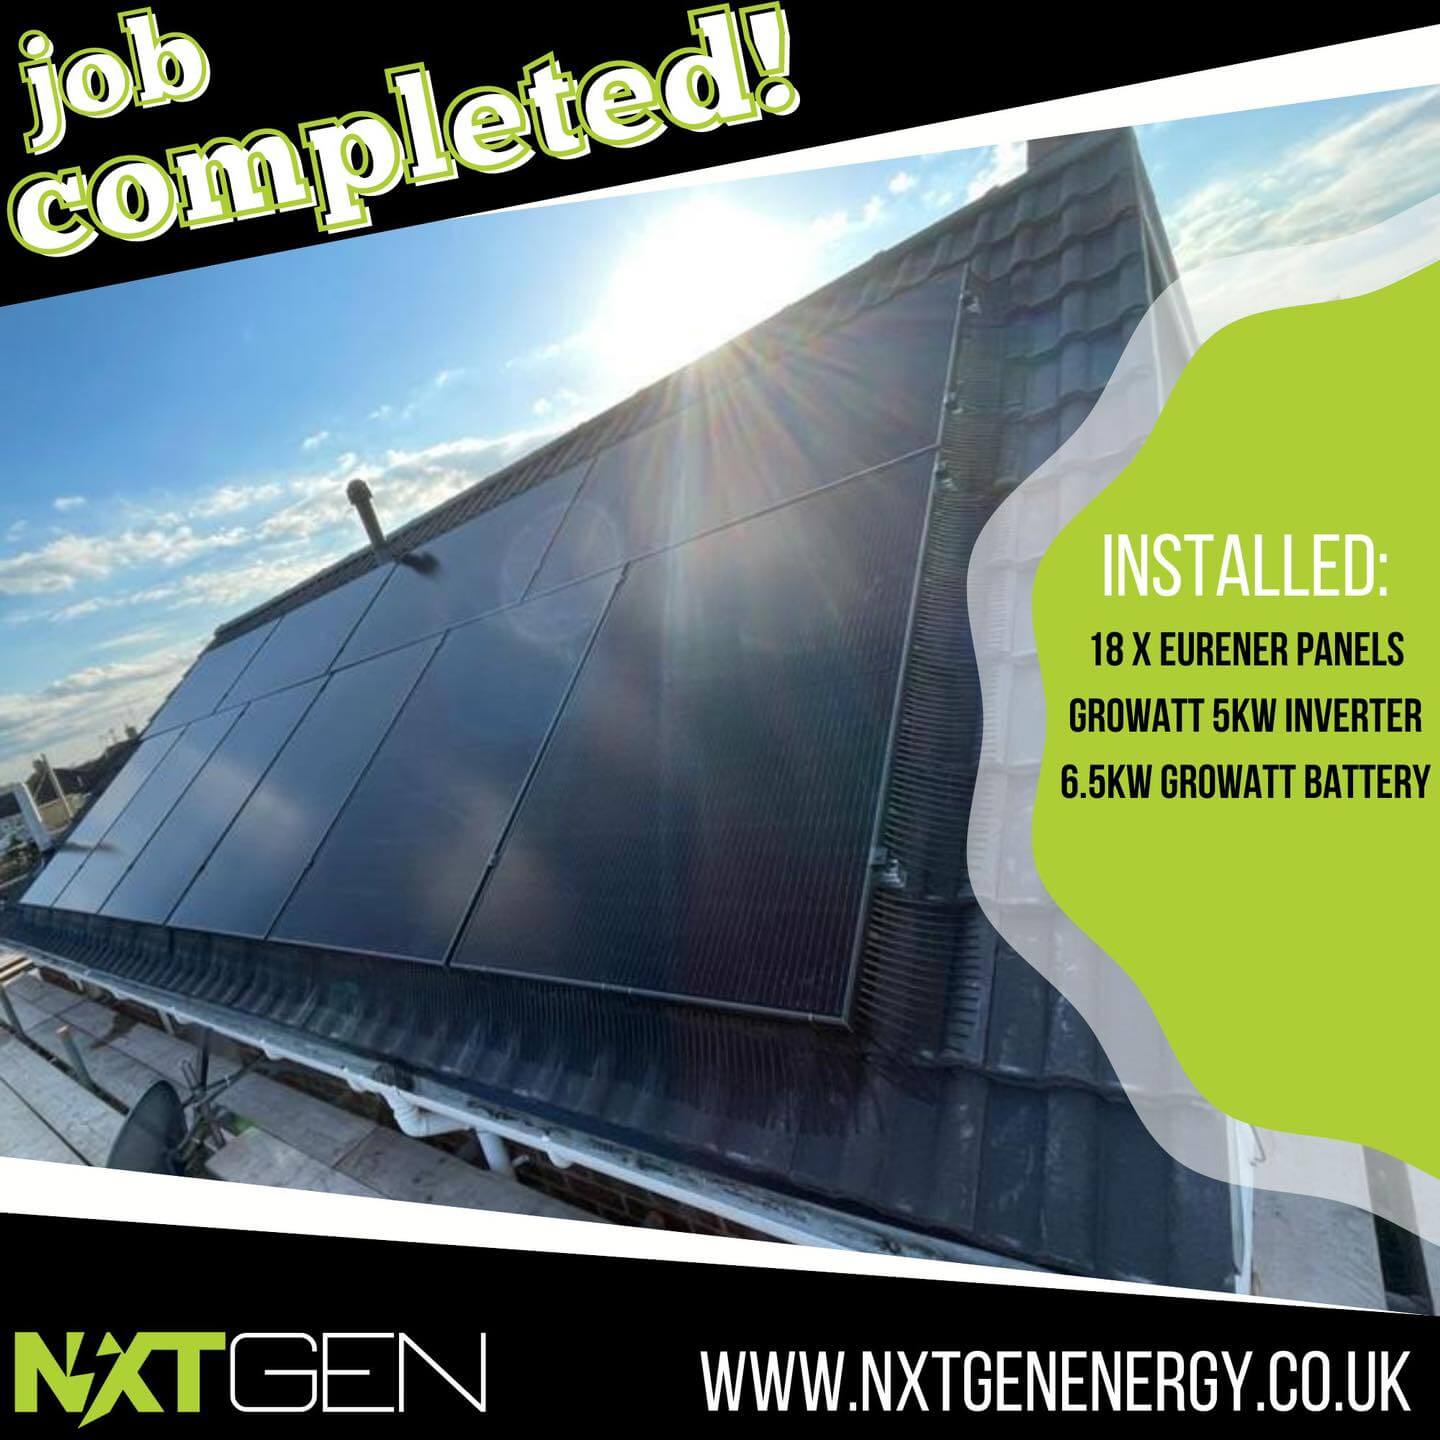 Completed Solar Panel System Install in Norfolk, UK